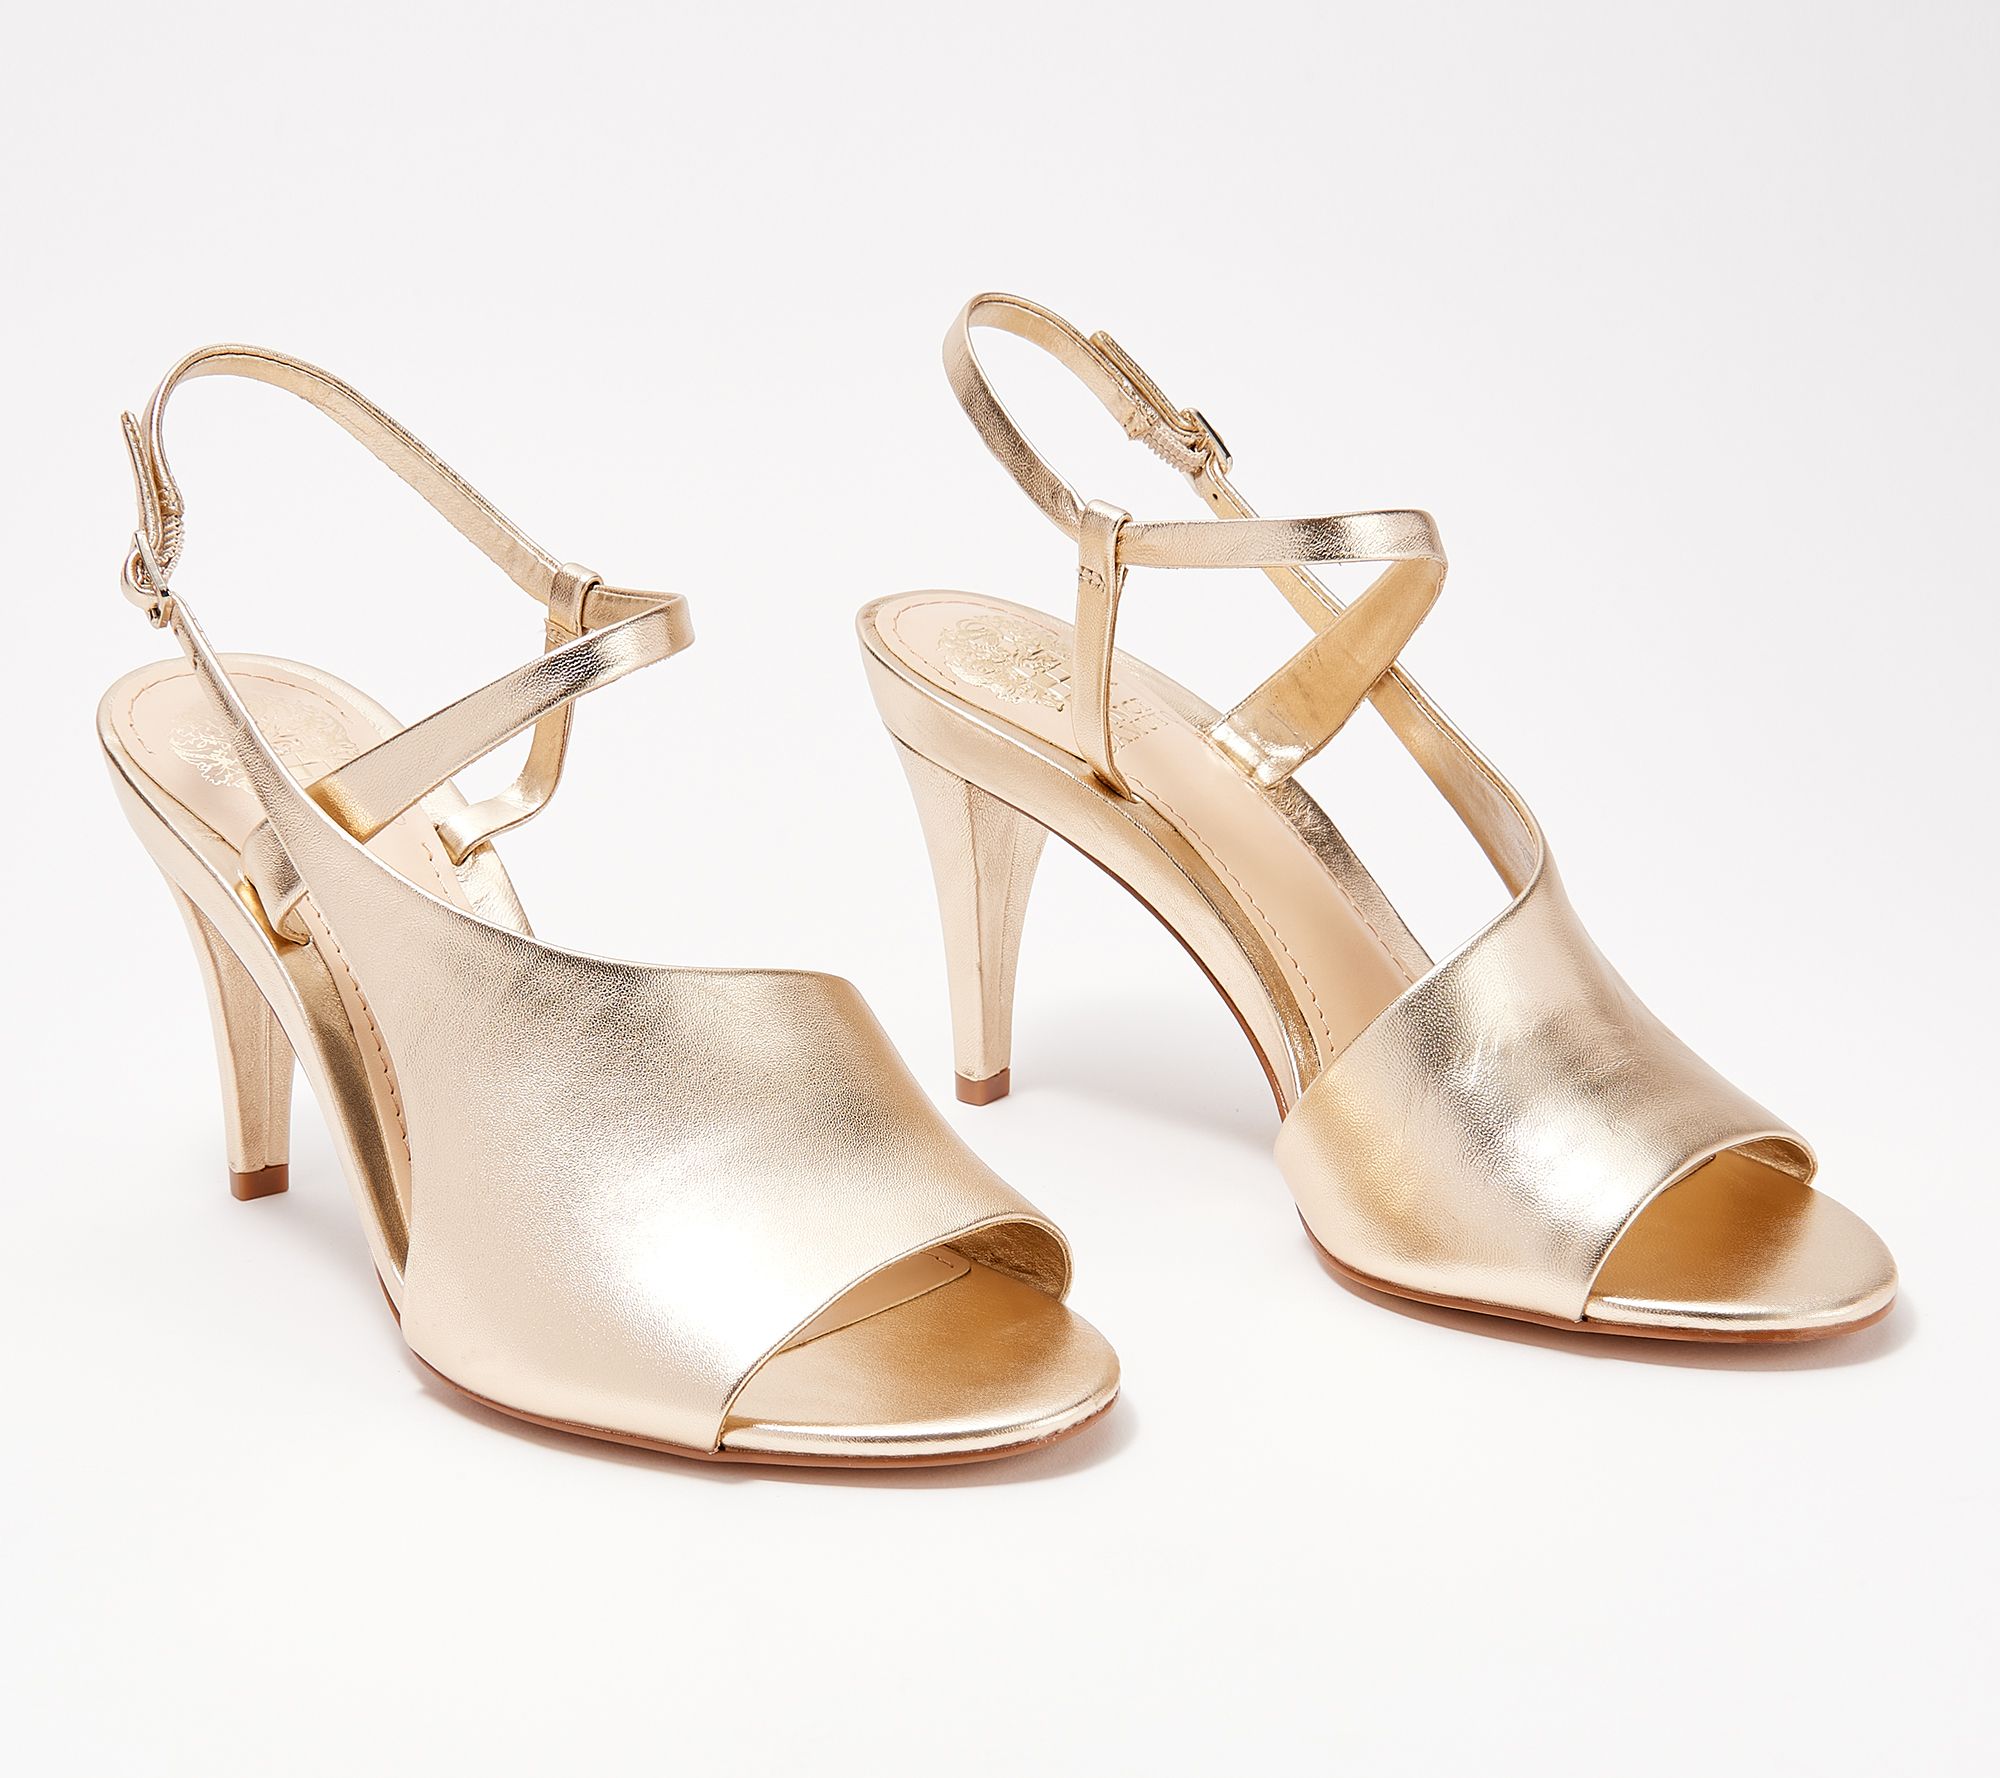 Vince Camuto Leather Heeled Strappy Sandals - Razanya - QVC.com